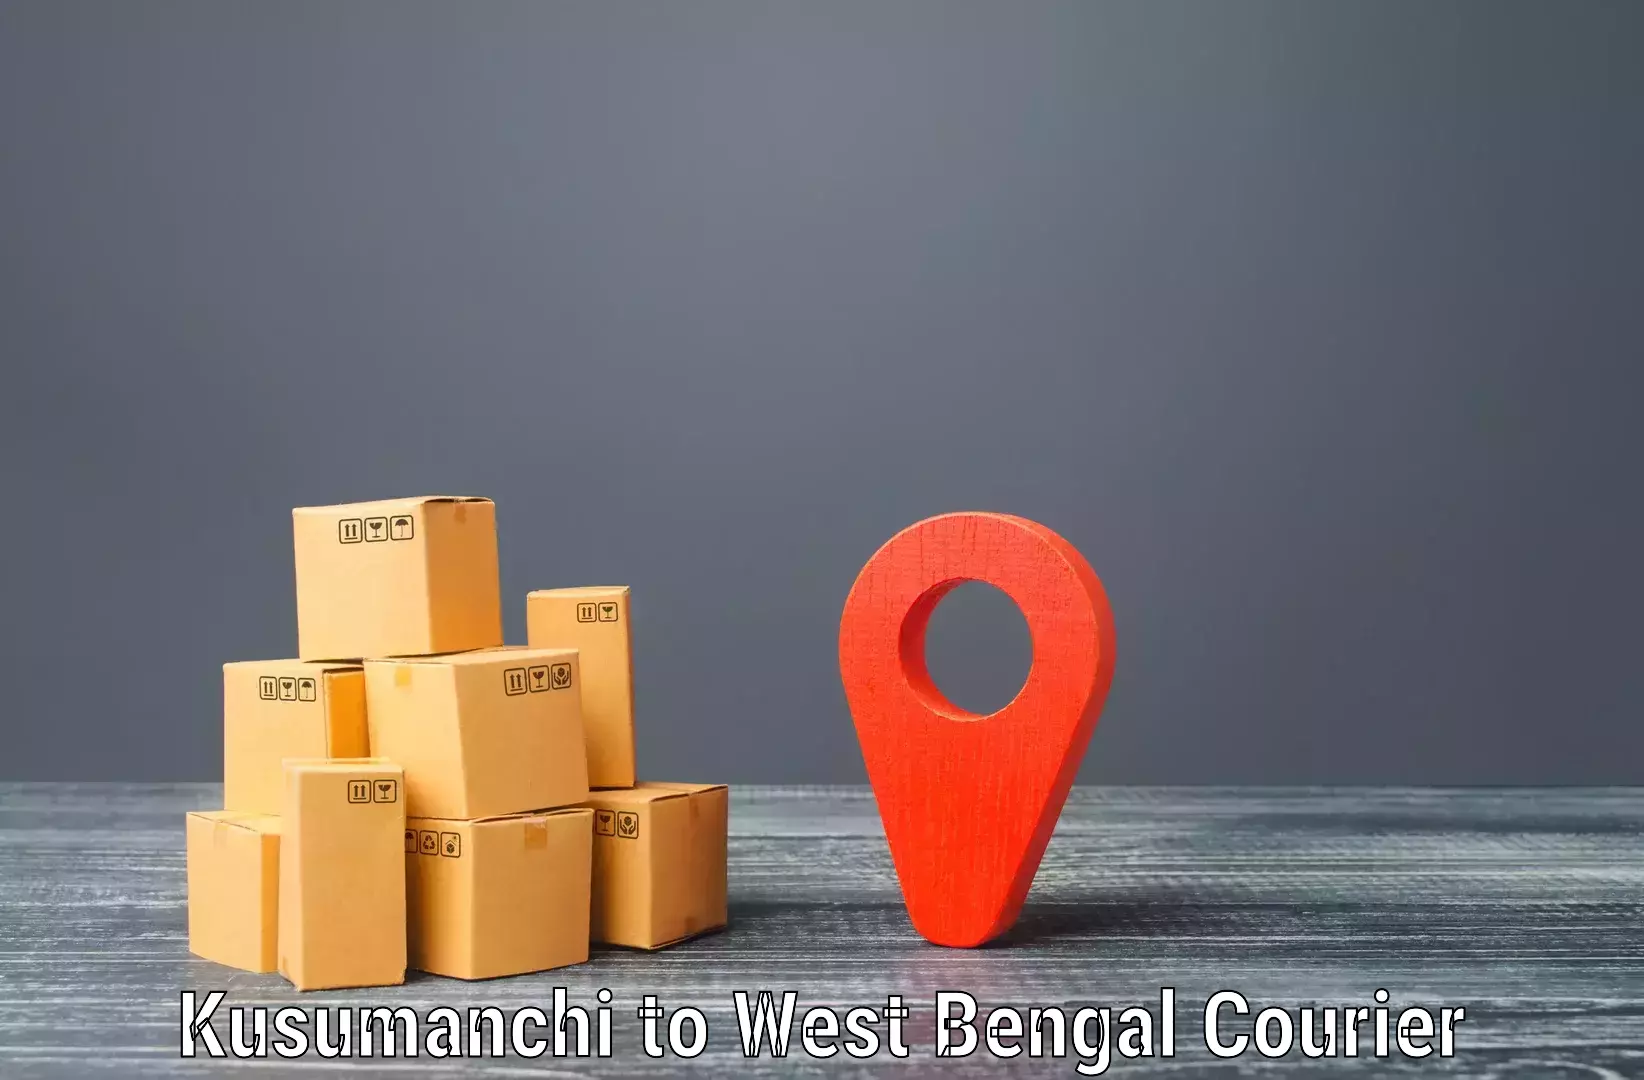 Postal and courier services in Kusumanchi to Darjeeling